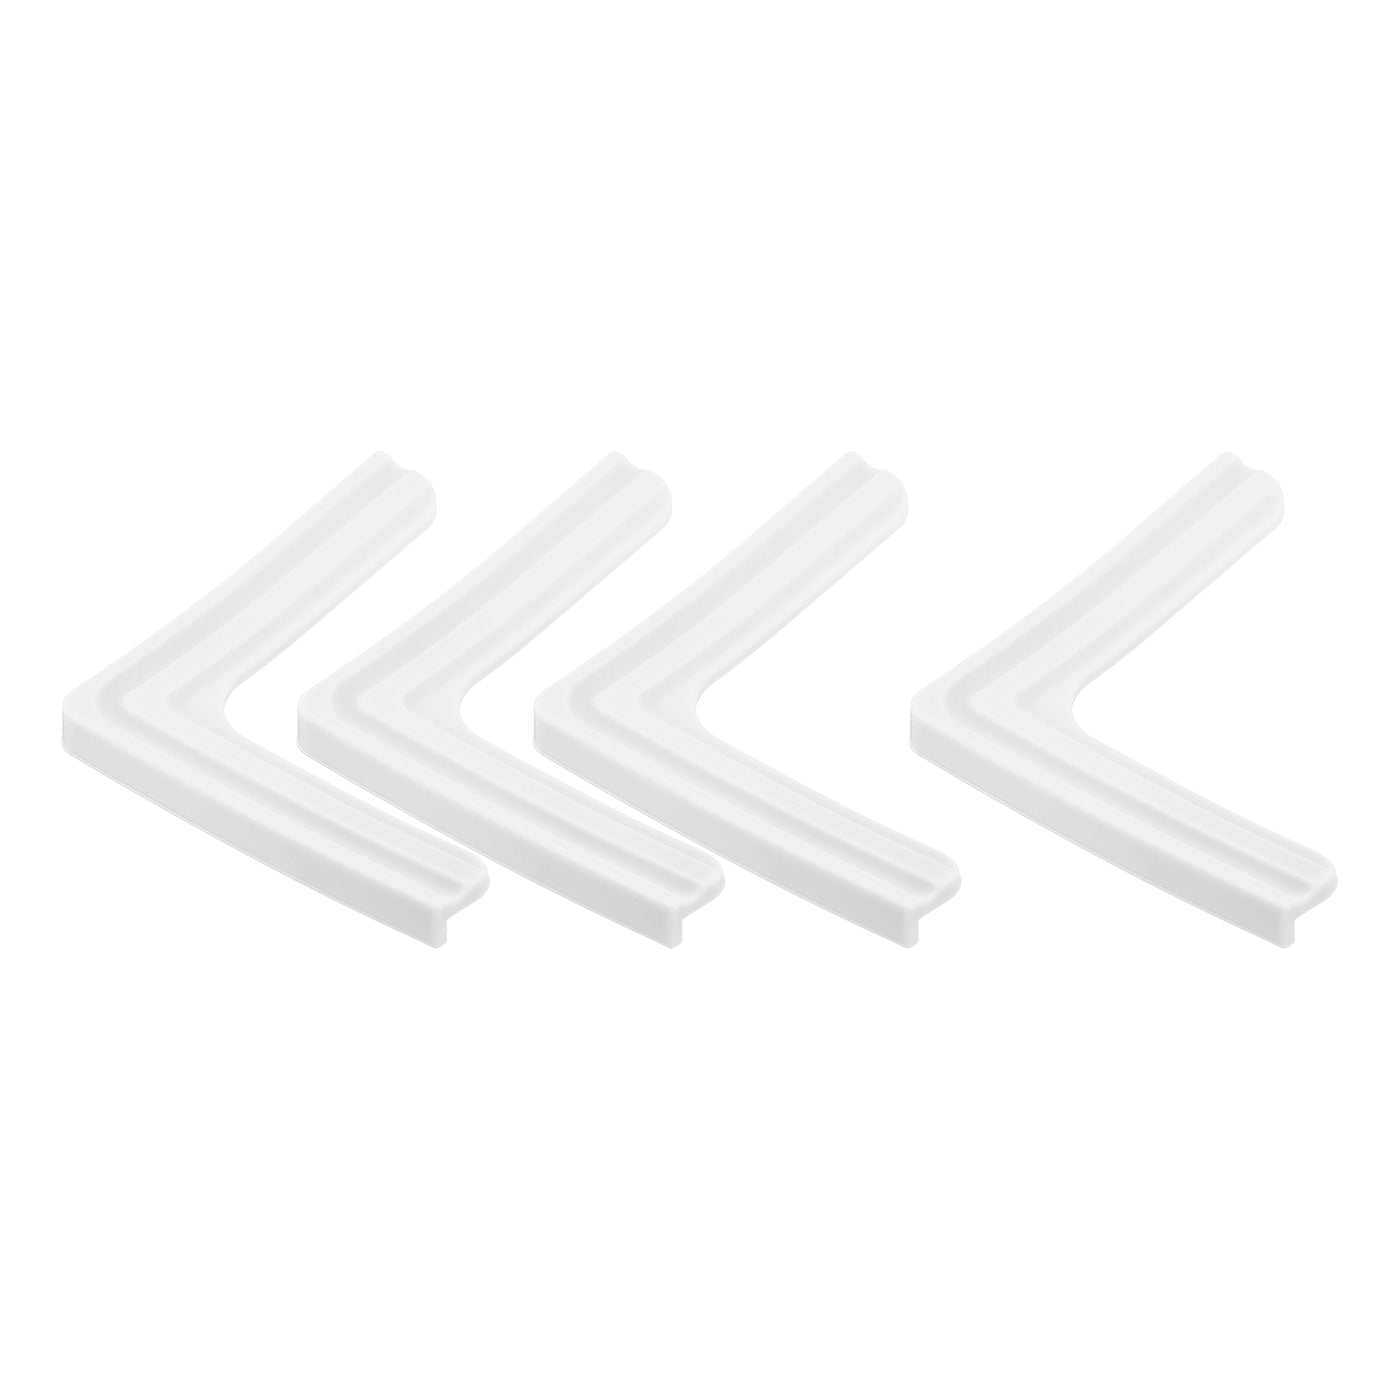 uxcell Uxcell Window Corner Edge Protectors, 4Pack Standard Lace Style 70mmX15mm Silver White